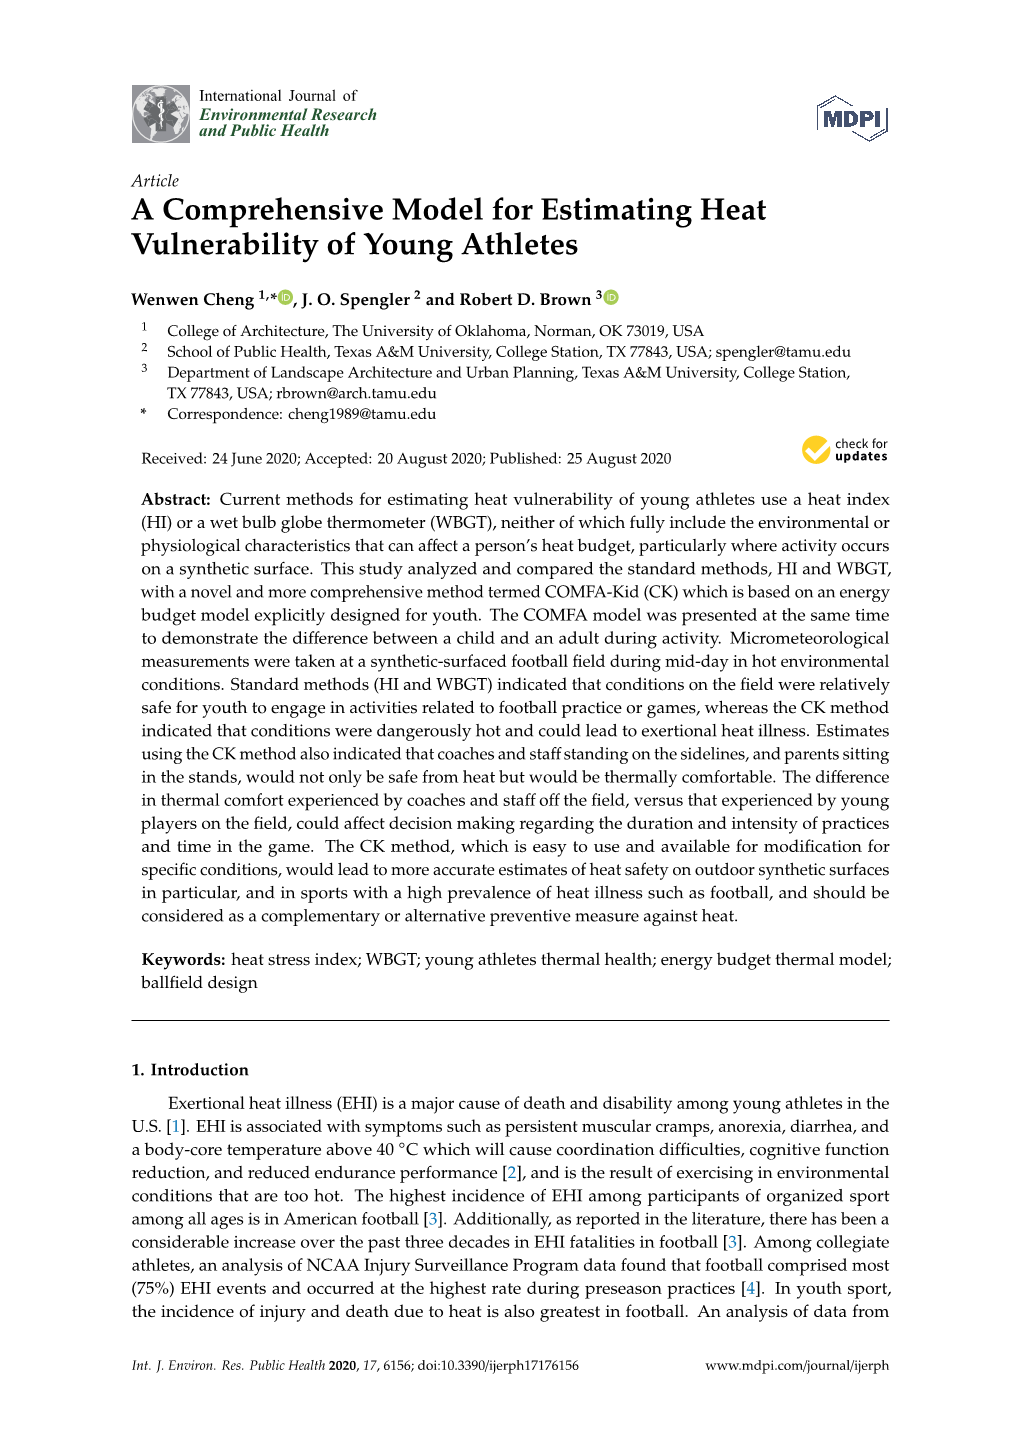 A Comprehensive Model for Estimating Heat Vulnerability of Young Athletes